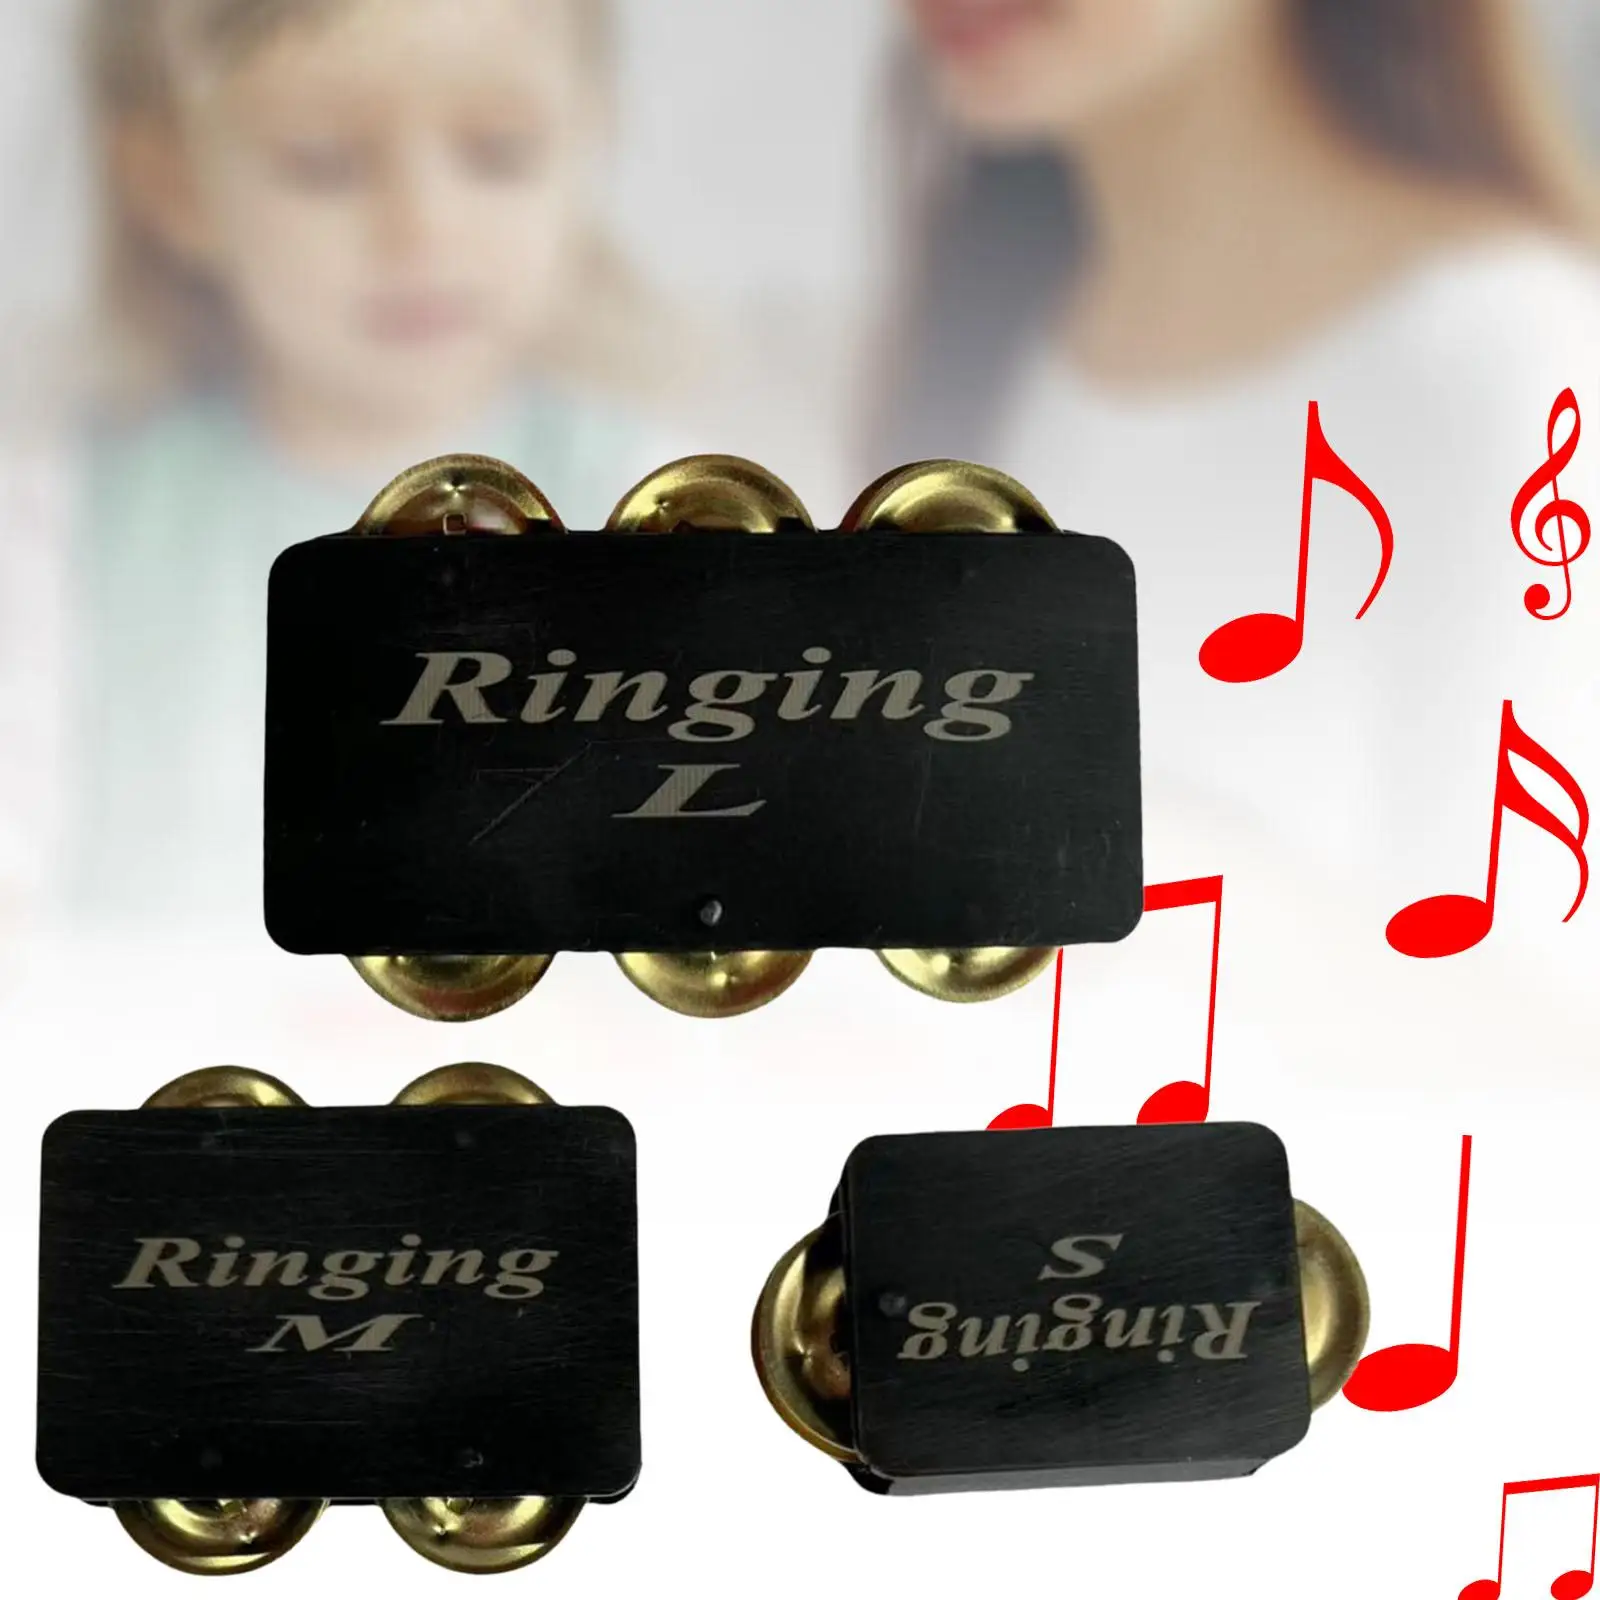 Finger Jingles Tambourine Rhythm Musical with Steel Jingles Hand Bell Rattle for Bongos Djembes Hand Drums Cajons Guitarists